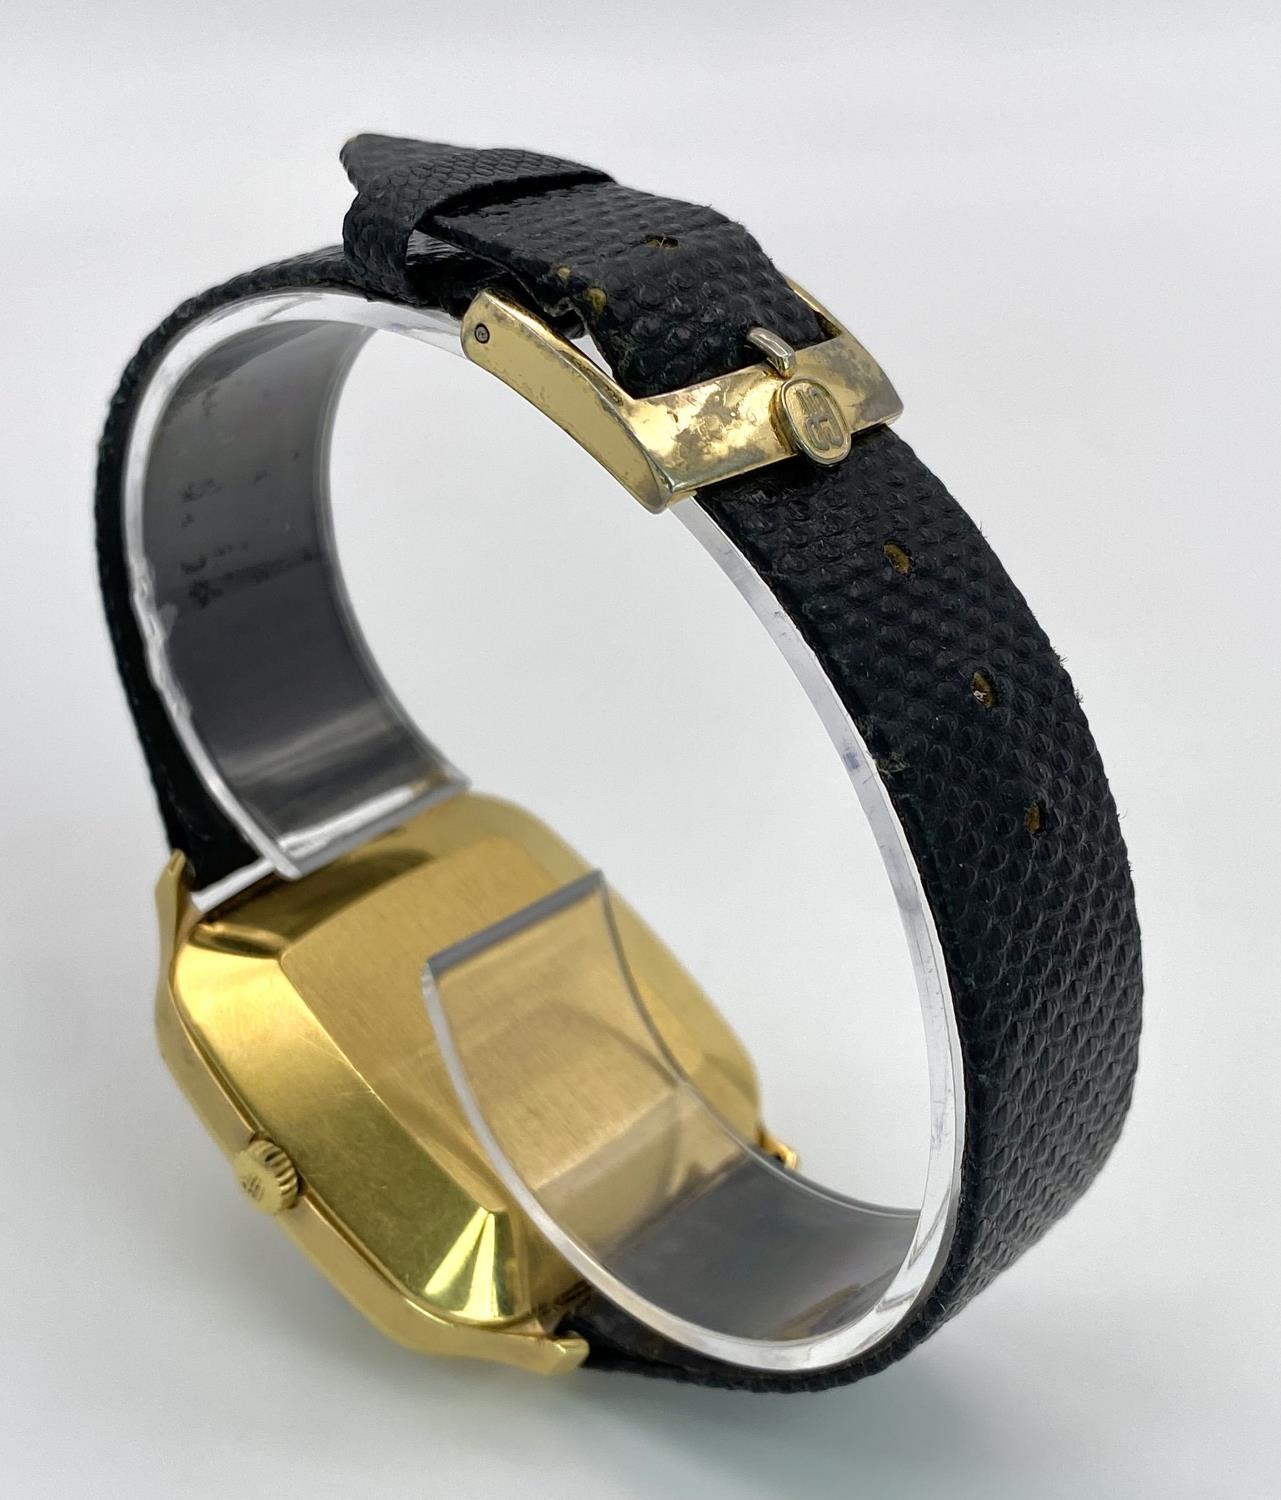 A Girard Perregaux Gold Plated Gyromatic Gents Watch. Black leather strap. Gold plated case - - Image 6 of 6